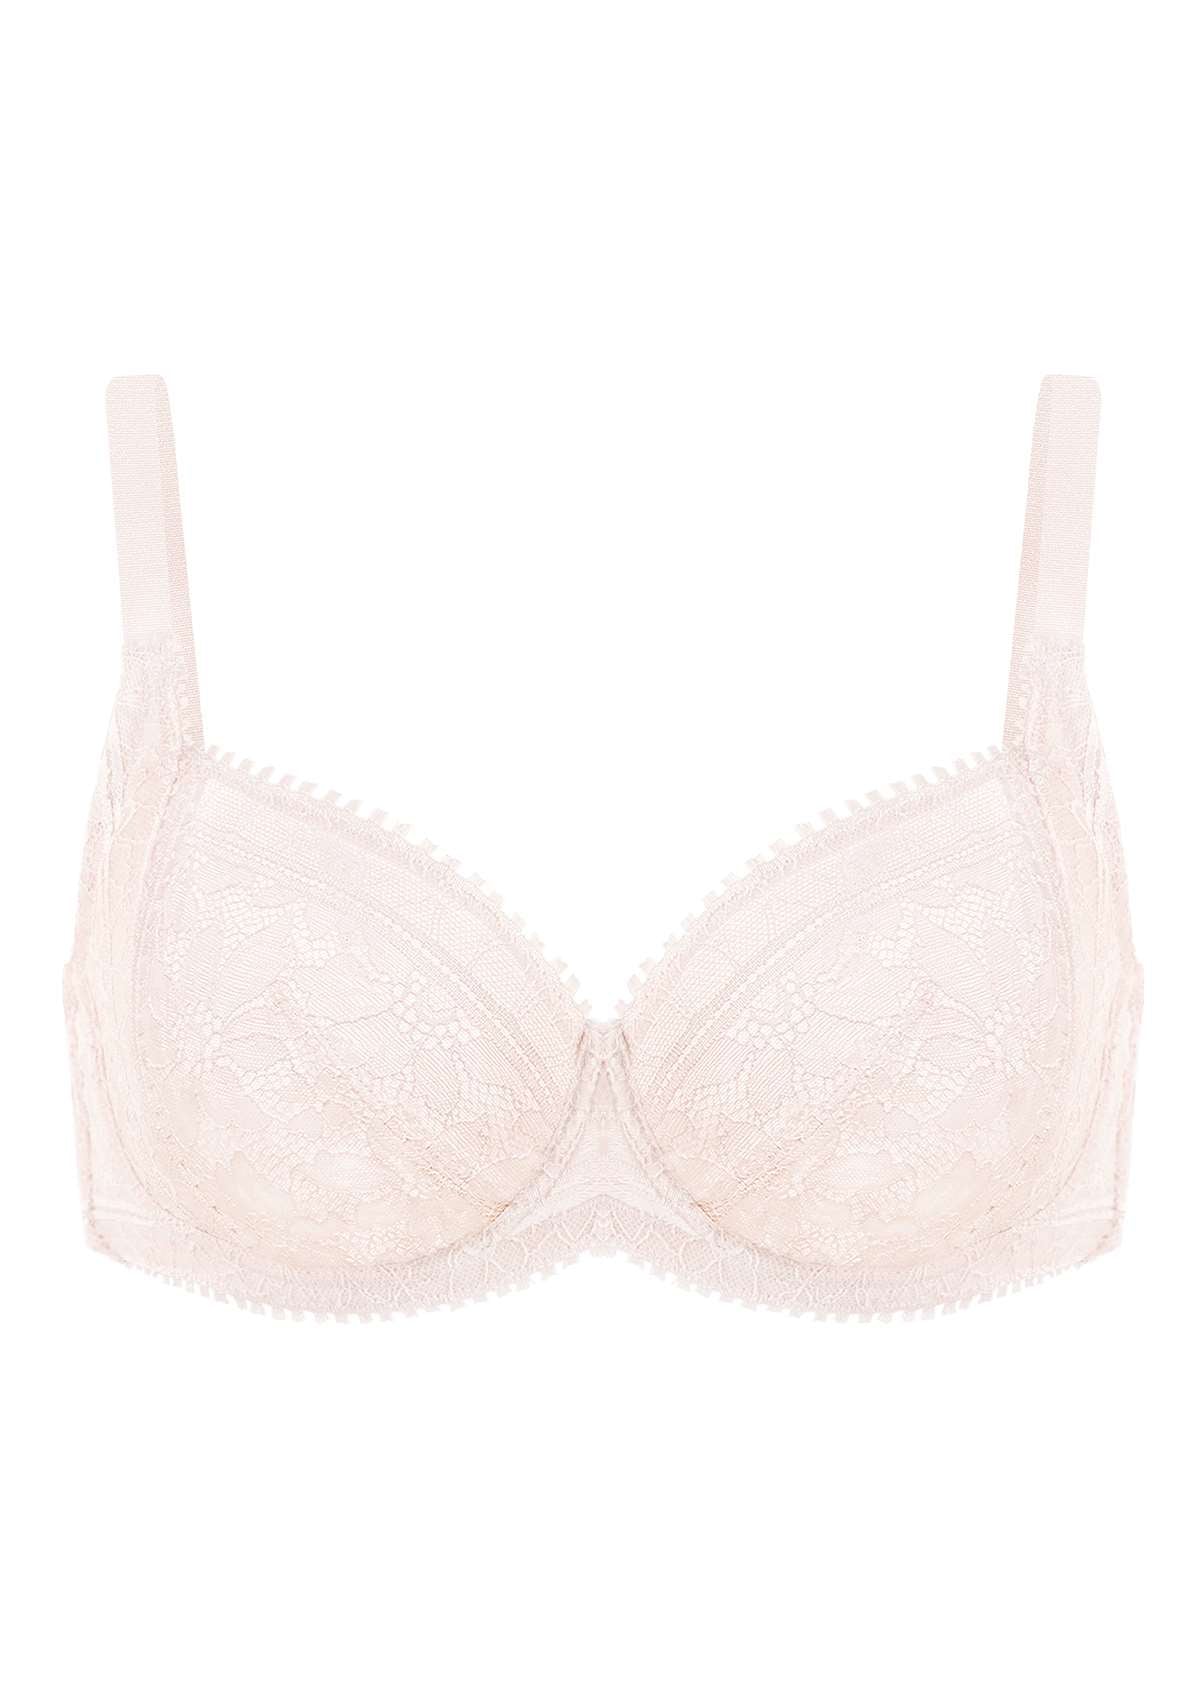 HSIA Silene Floral Delicate Unlined Lace Soft Cup Uplift Bra - Champagne / 38 / DD/E